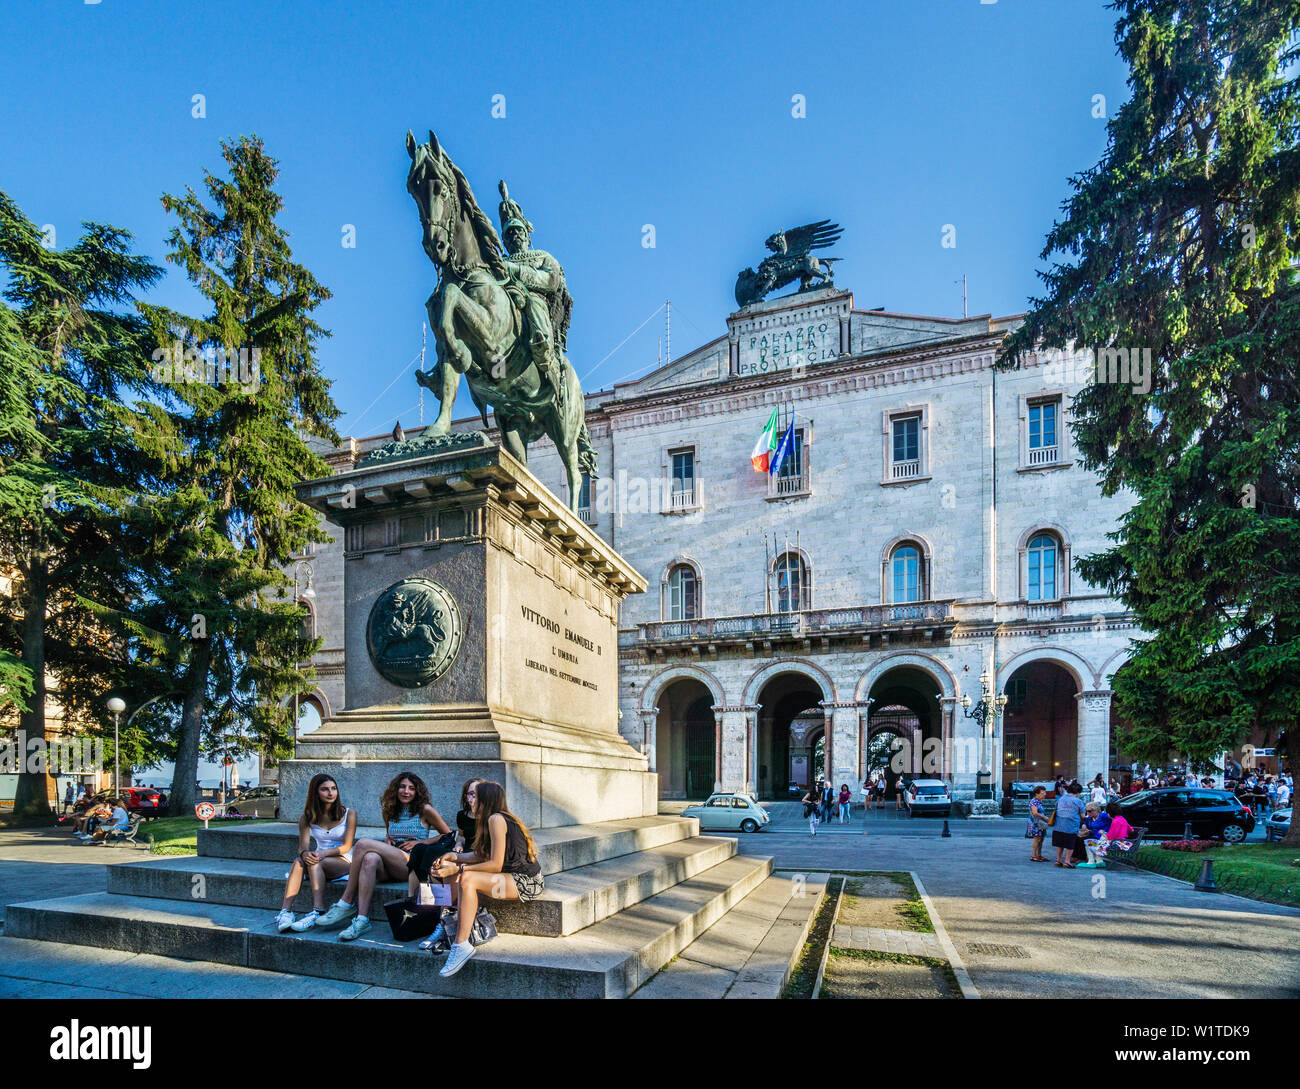 monument to the Vittorio Emanuele II, the first king of a united Italy at Piazza Italia, Perugia, Umbria, Italy Stock Photo